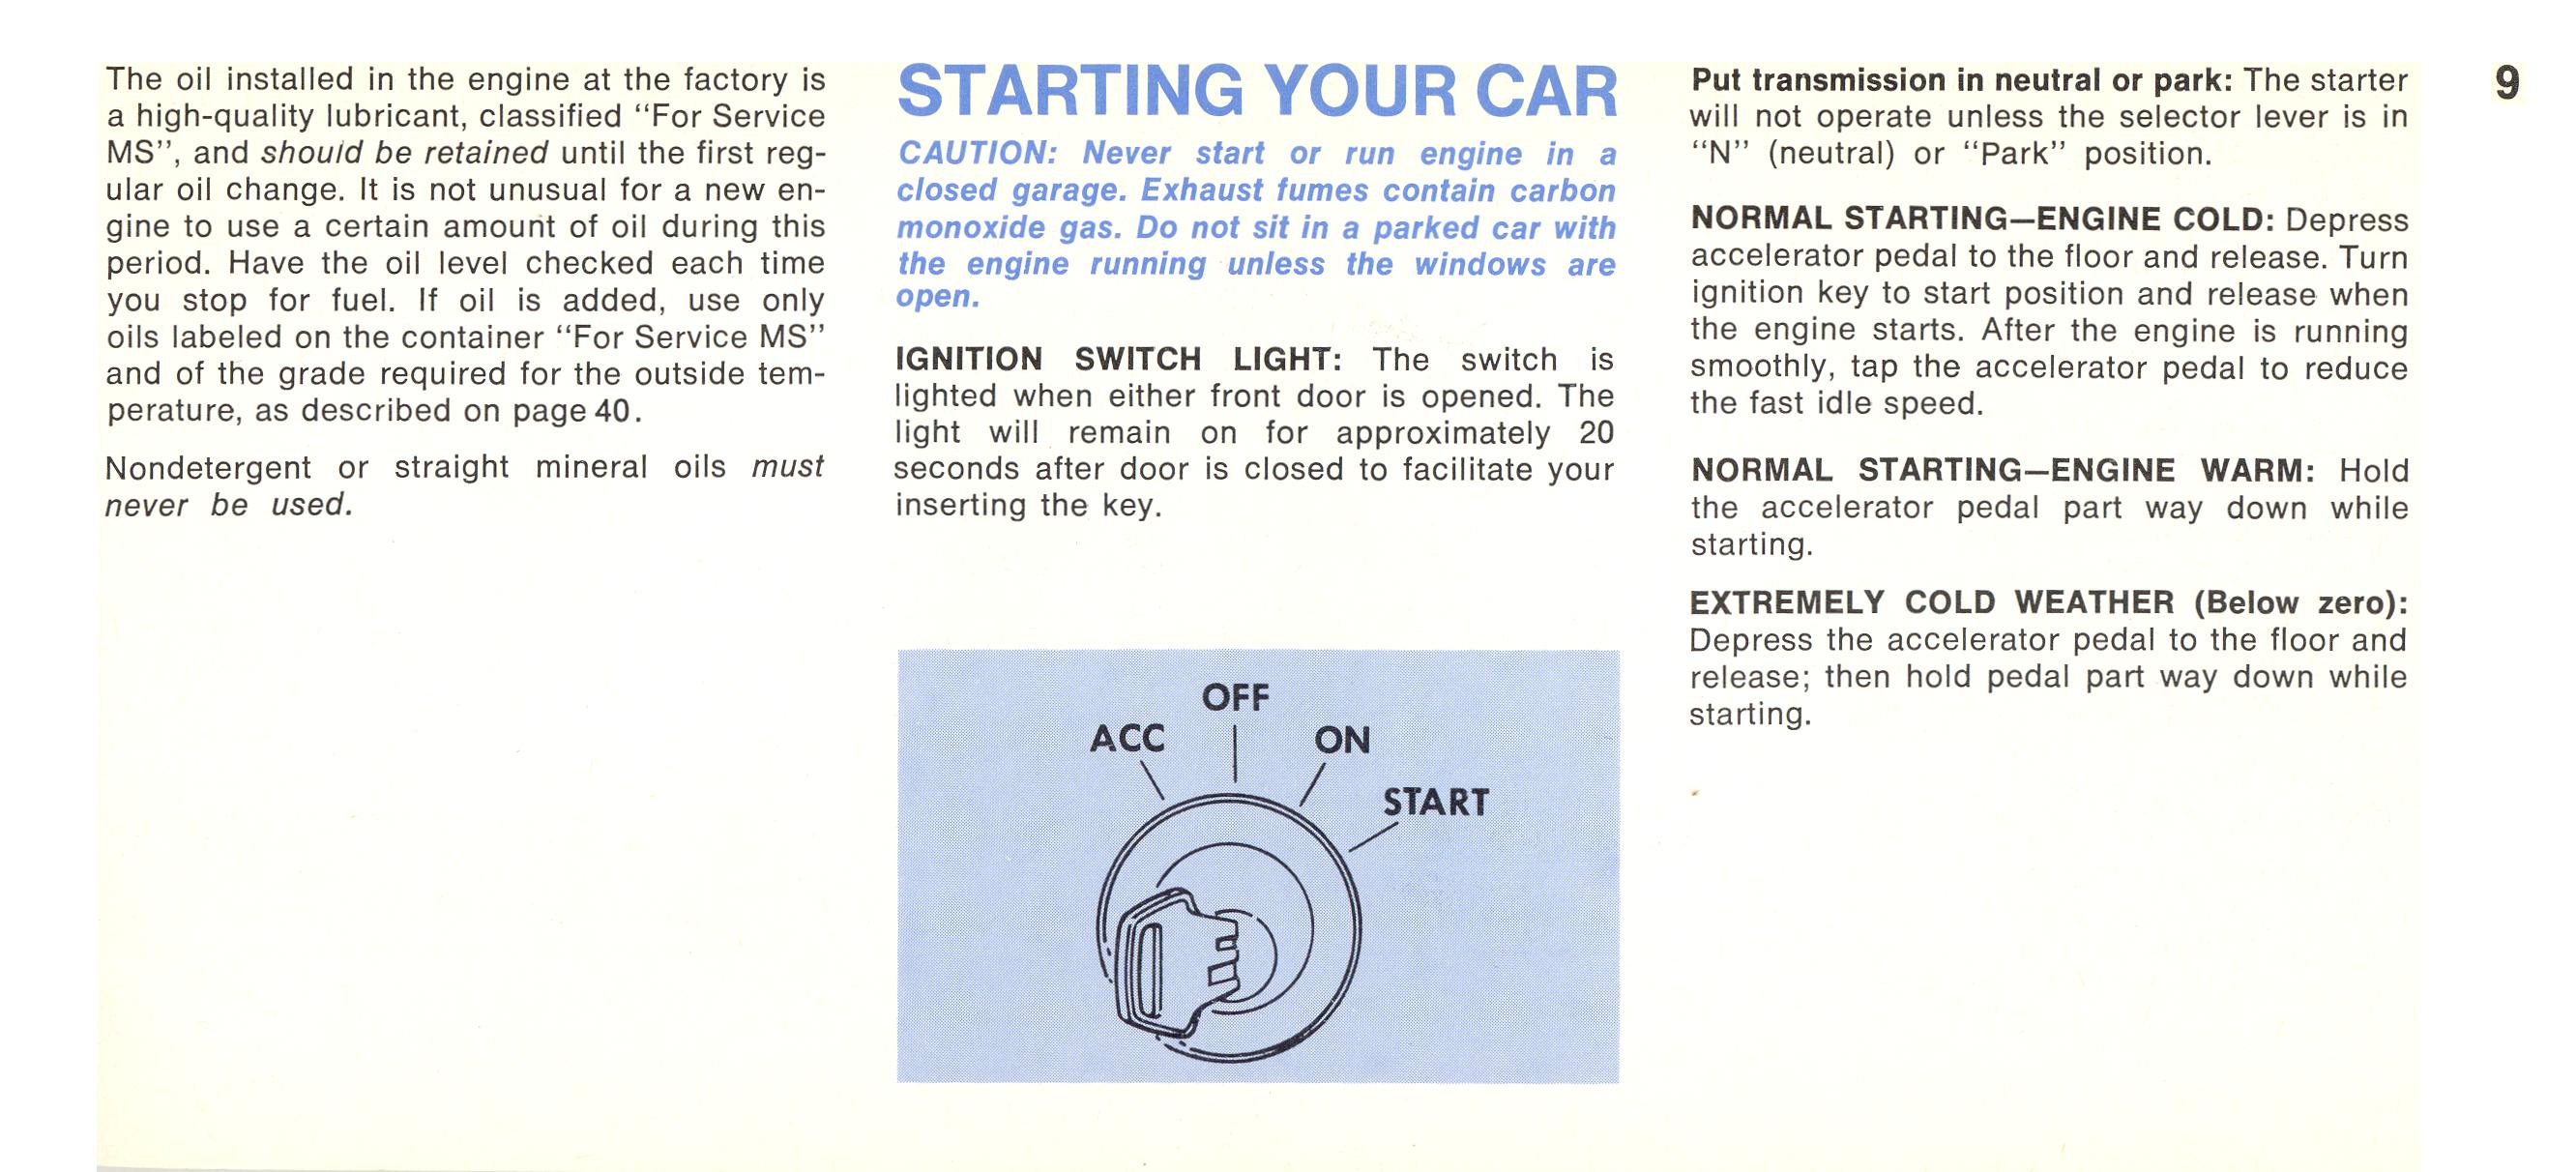 1968 Chrysler Imperial Owners Manual Page 25